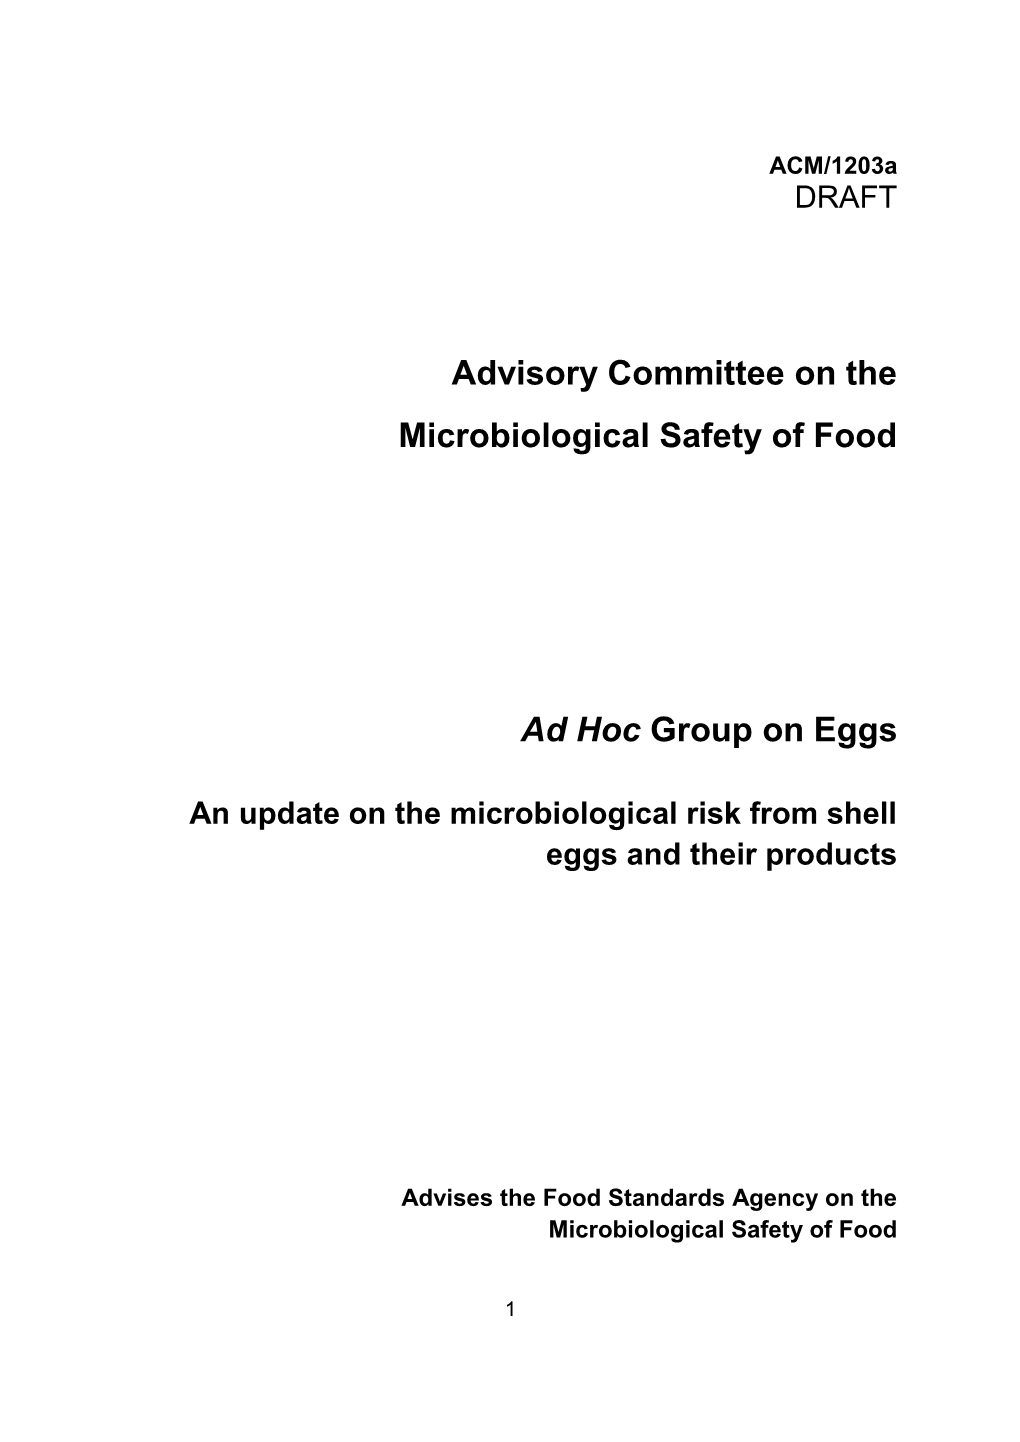 Advisory Committee on the Microbiological Safety of Food Ad